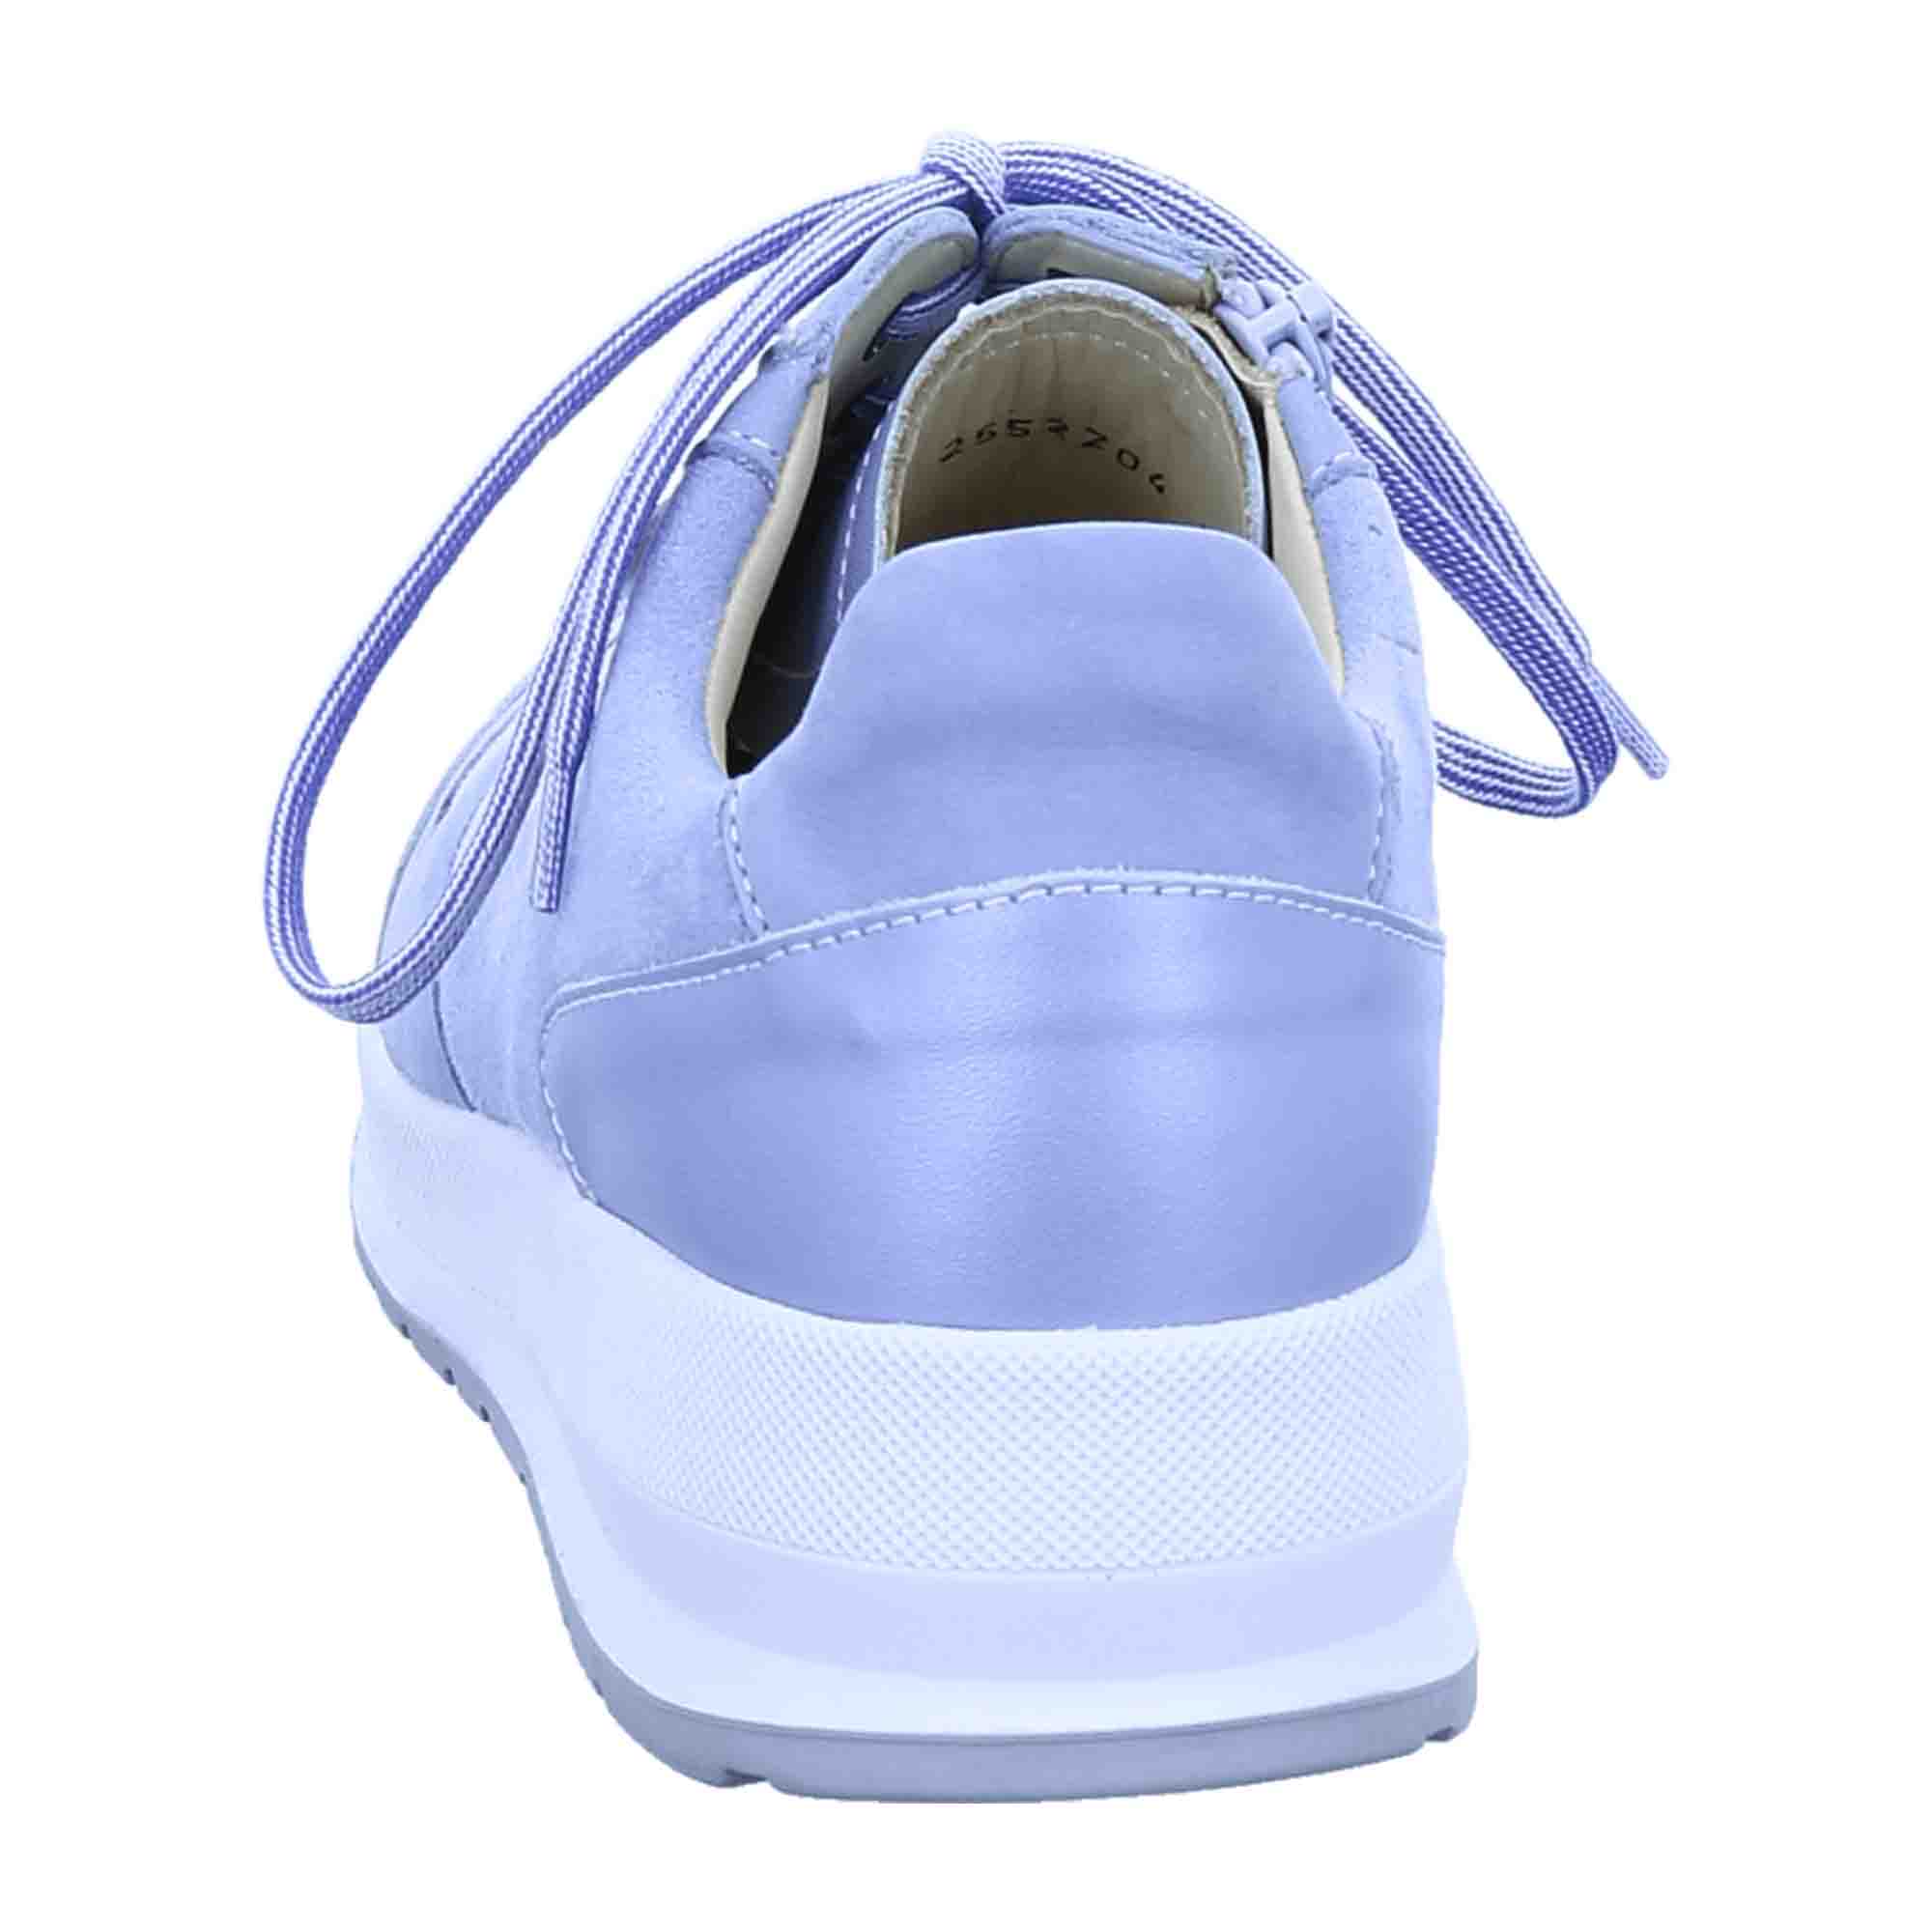 Finn Comfort Mori Sky Blue Lace-Up Shoes with Removable Insole - Comfortable Leather Shoes for Women